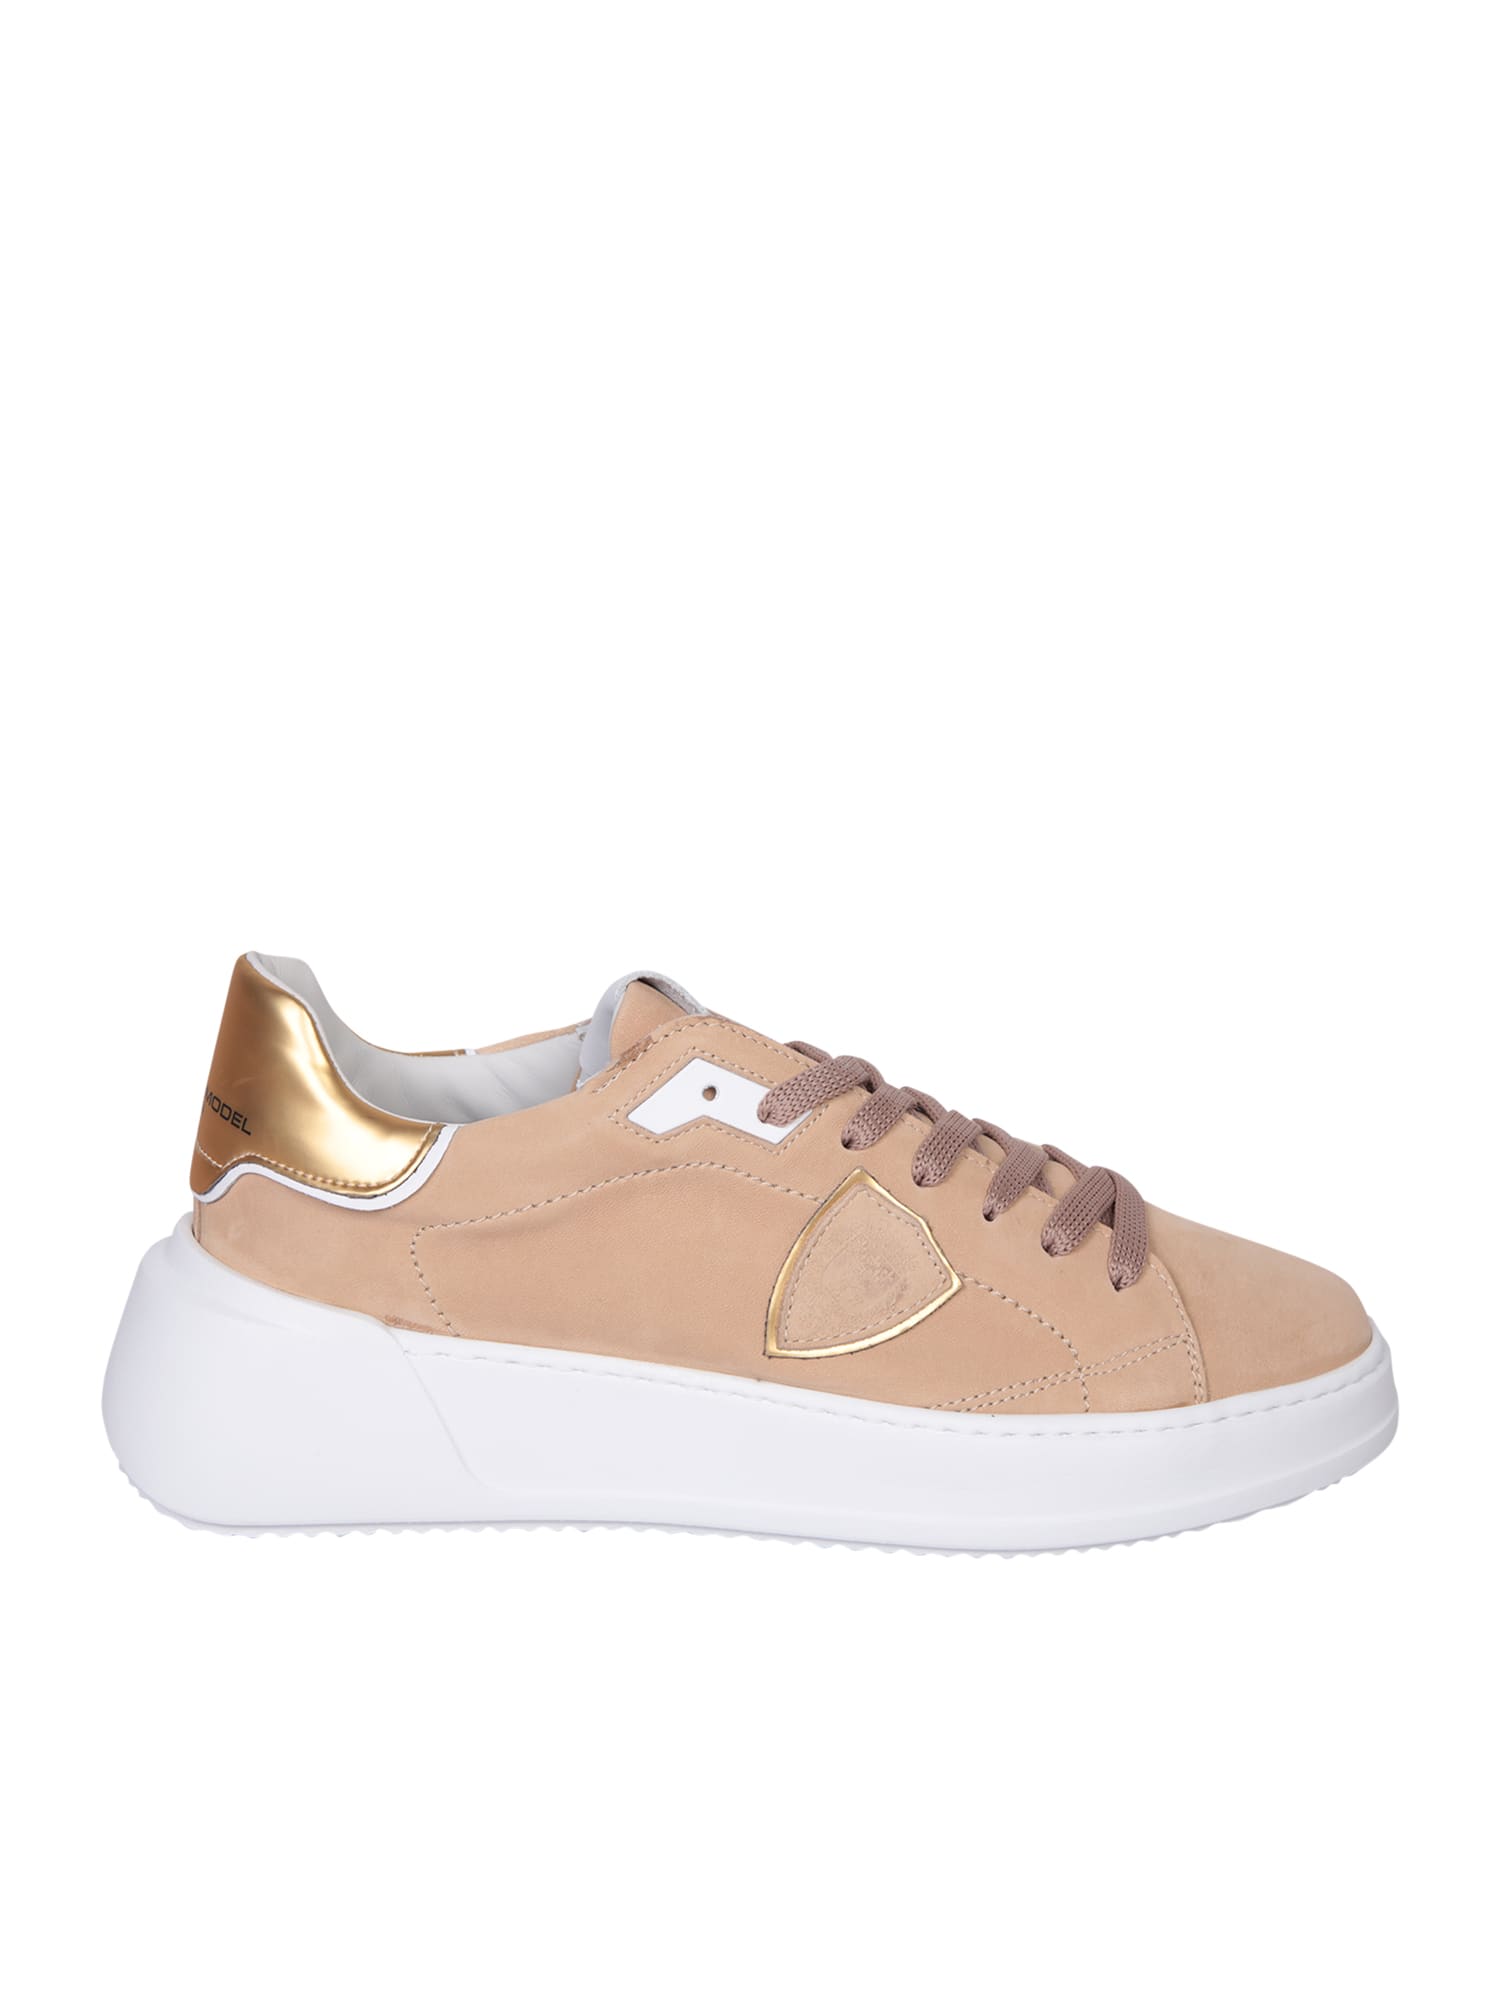 PHILIPPE MODEL TRES TEMPLE BEIGE trainers